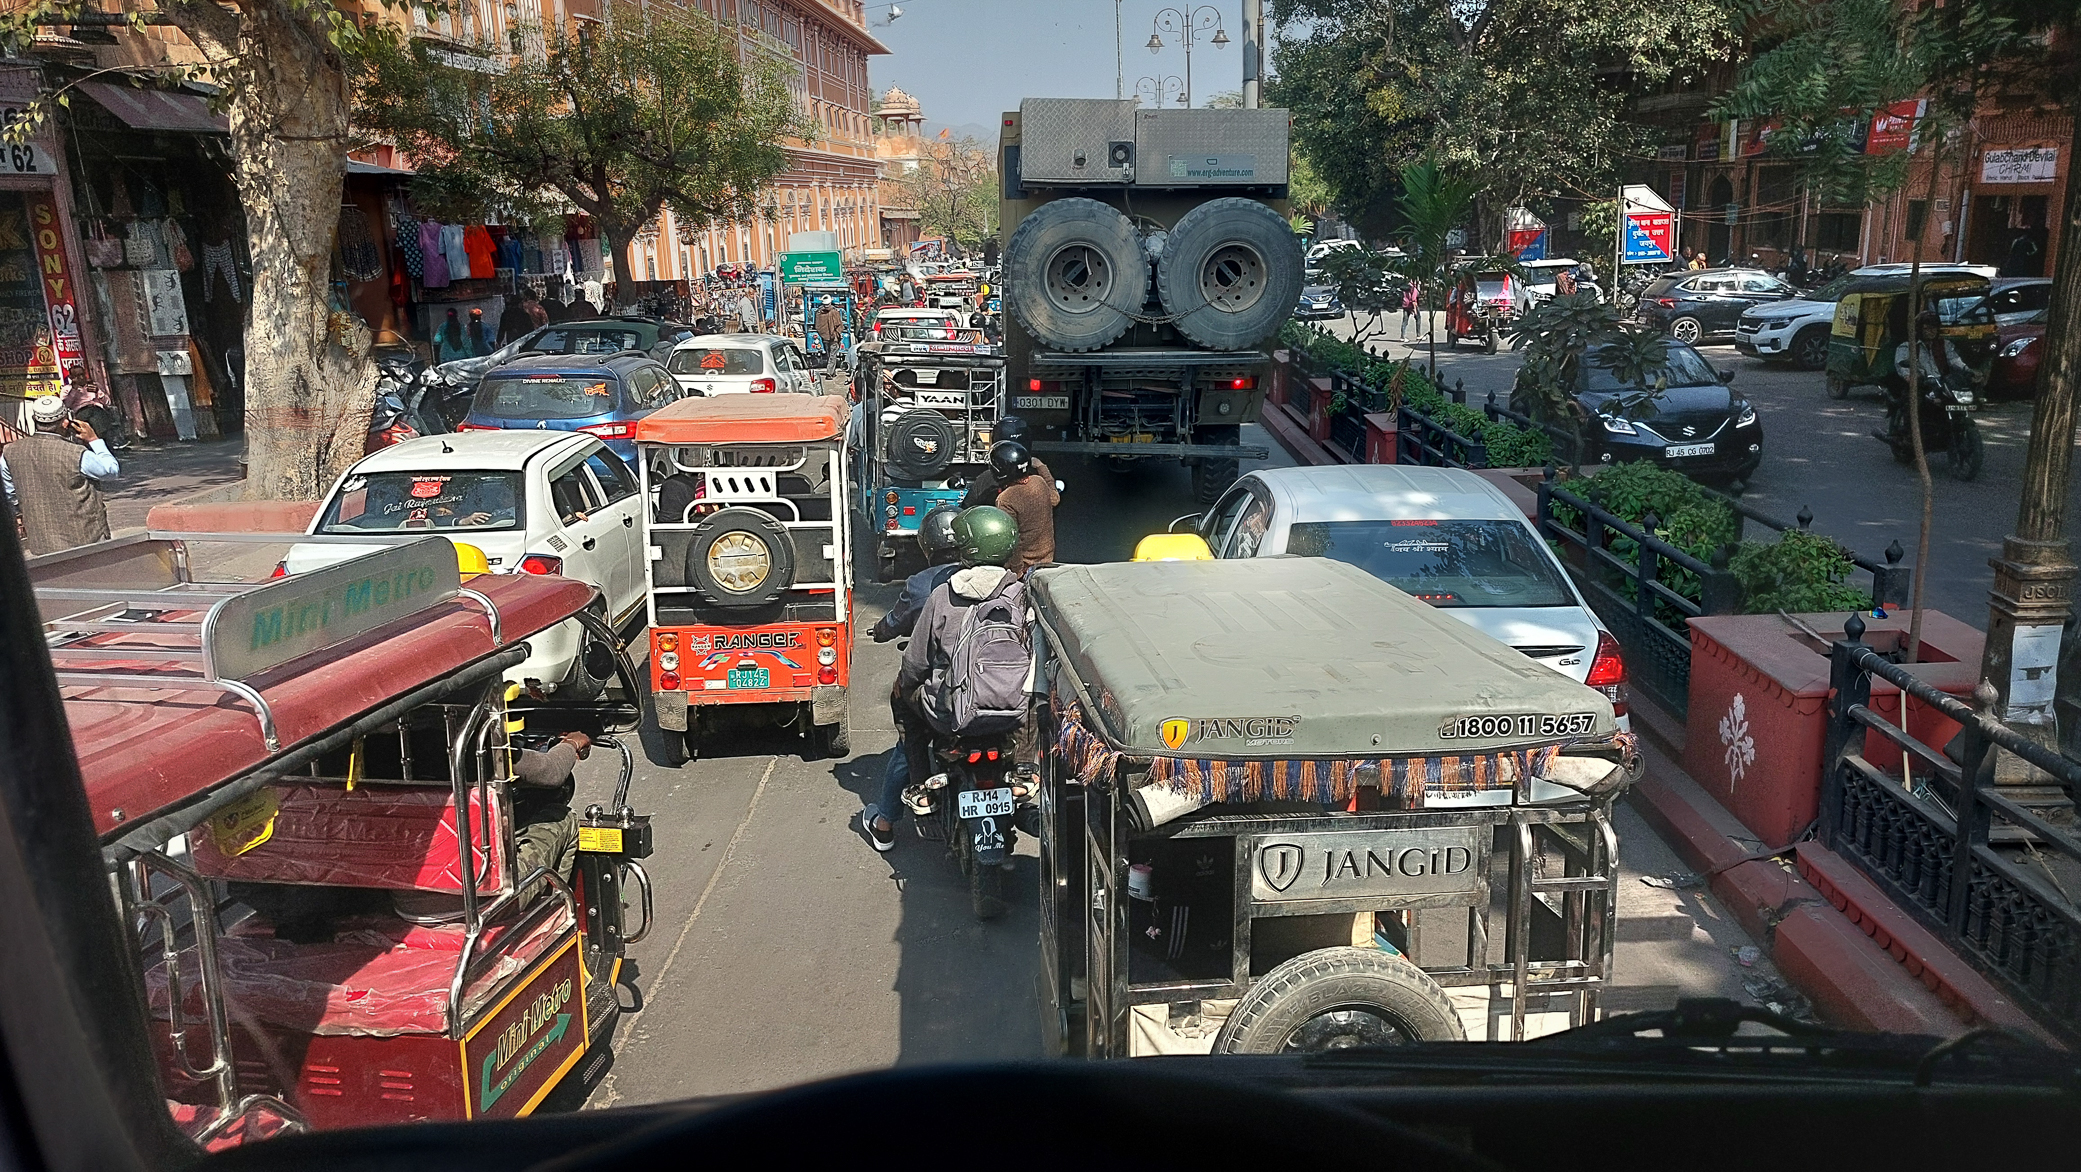 <span  class="uc_style_uc_tiles_grid_image_elementor_uc_items_attribute_title" style="color:#ffffff;">Jaipur: the traffic was really busy</span>